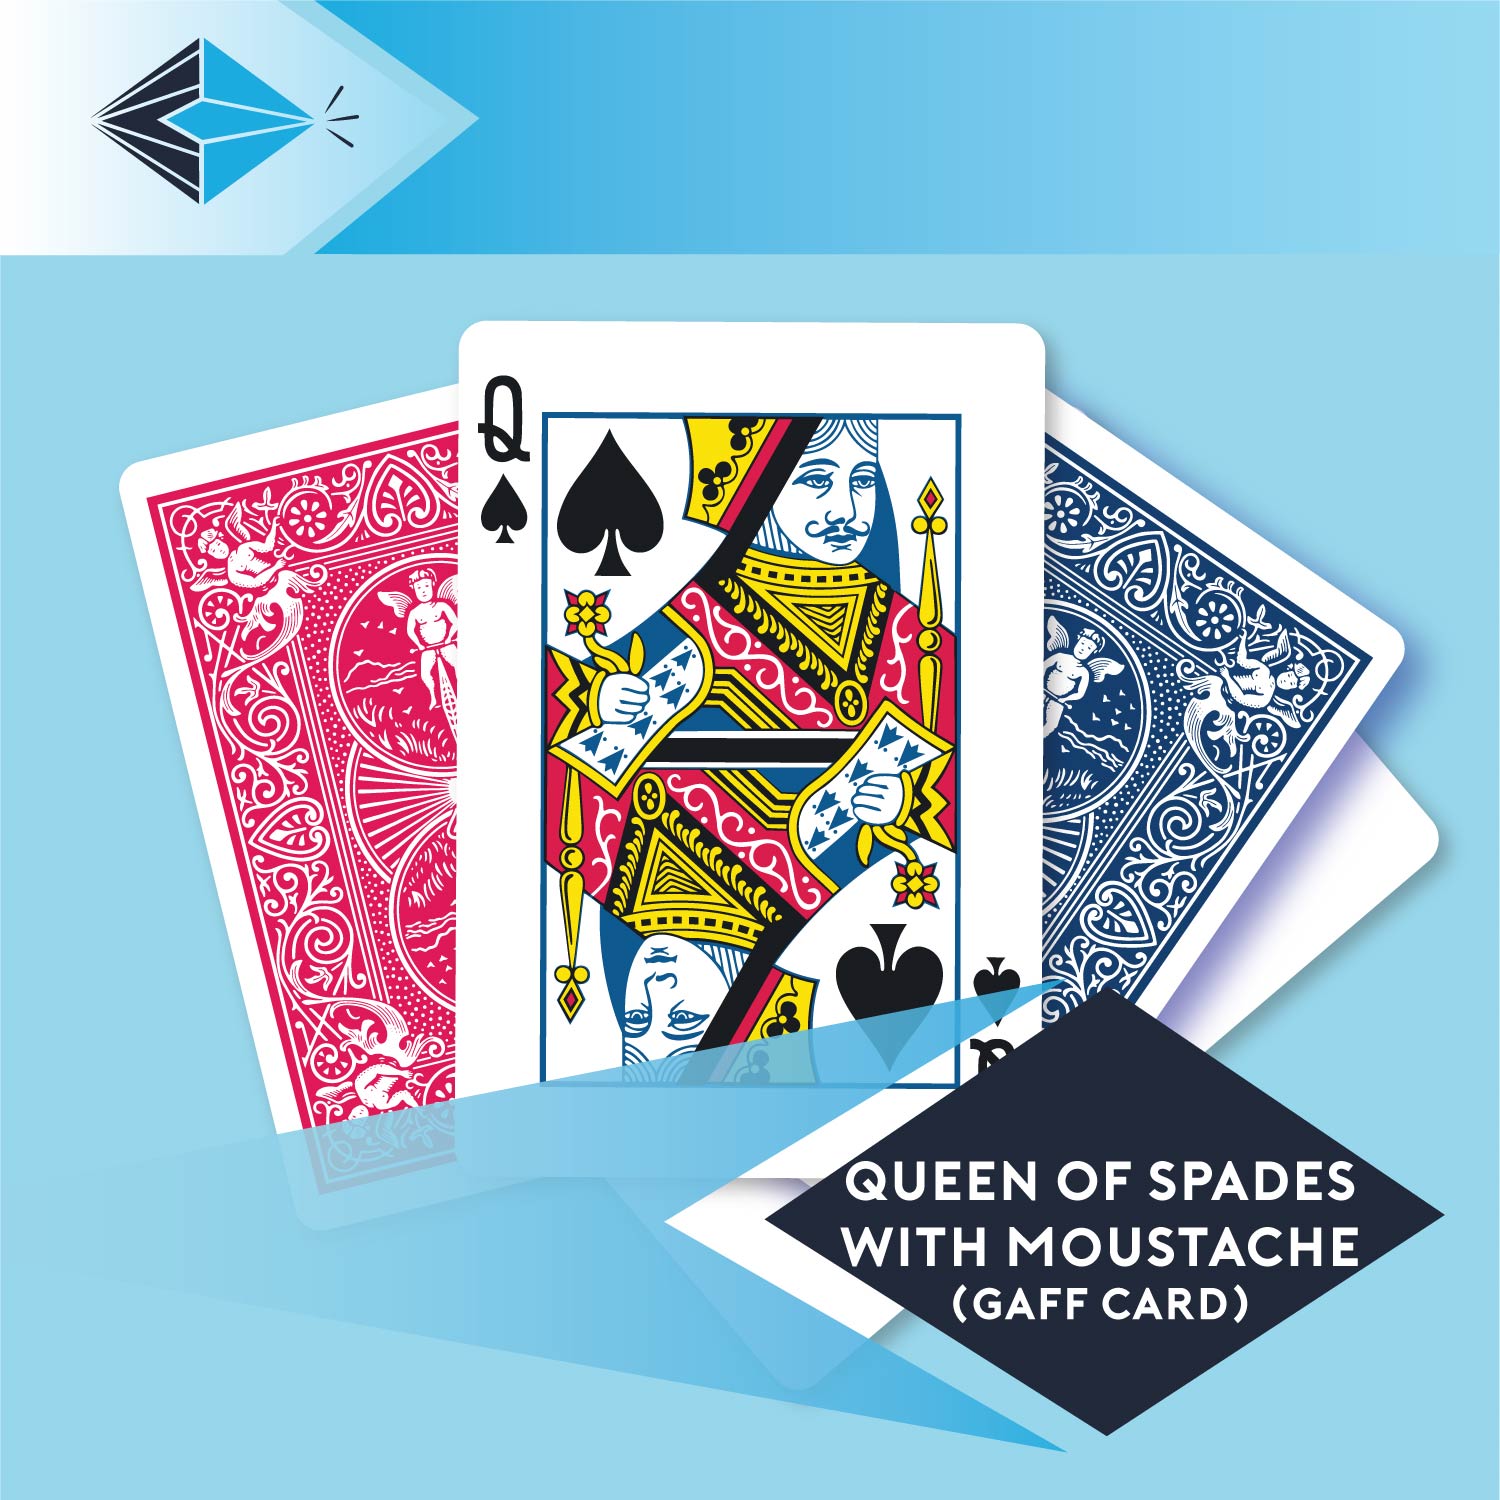 queen of spades with moustache gaff card 1 printbymagic magicians gaff cards printers Stockport Manchester UK